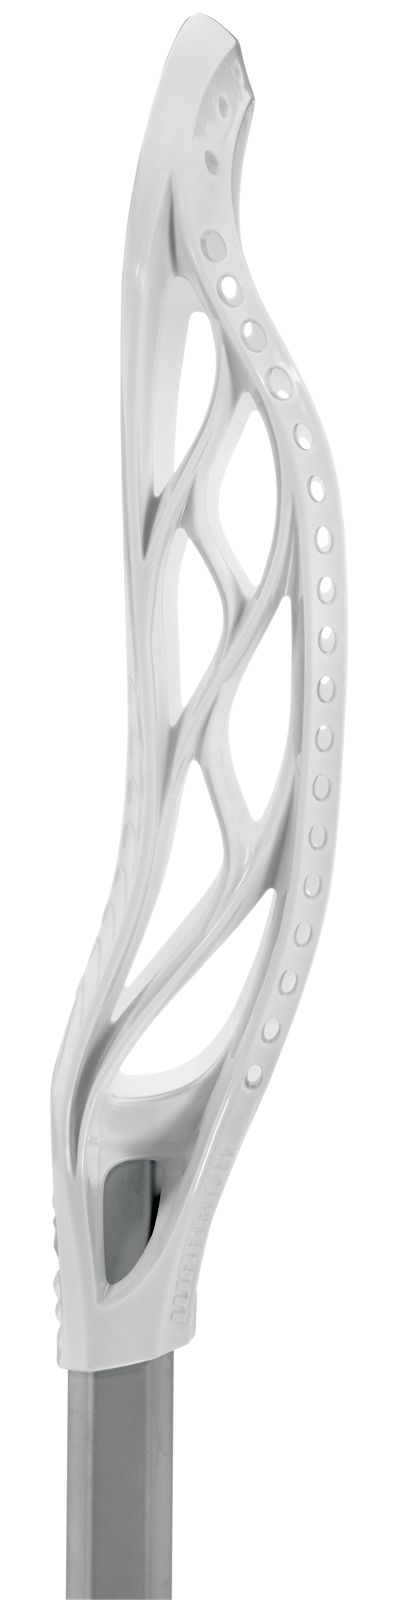 Revo 3 Head Unstrung , White image number 2